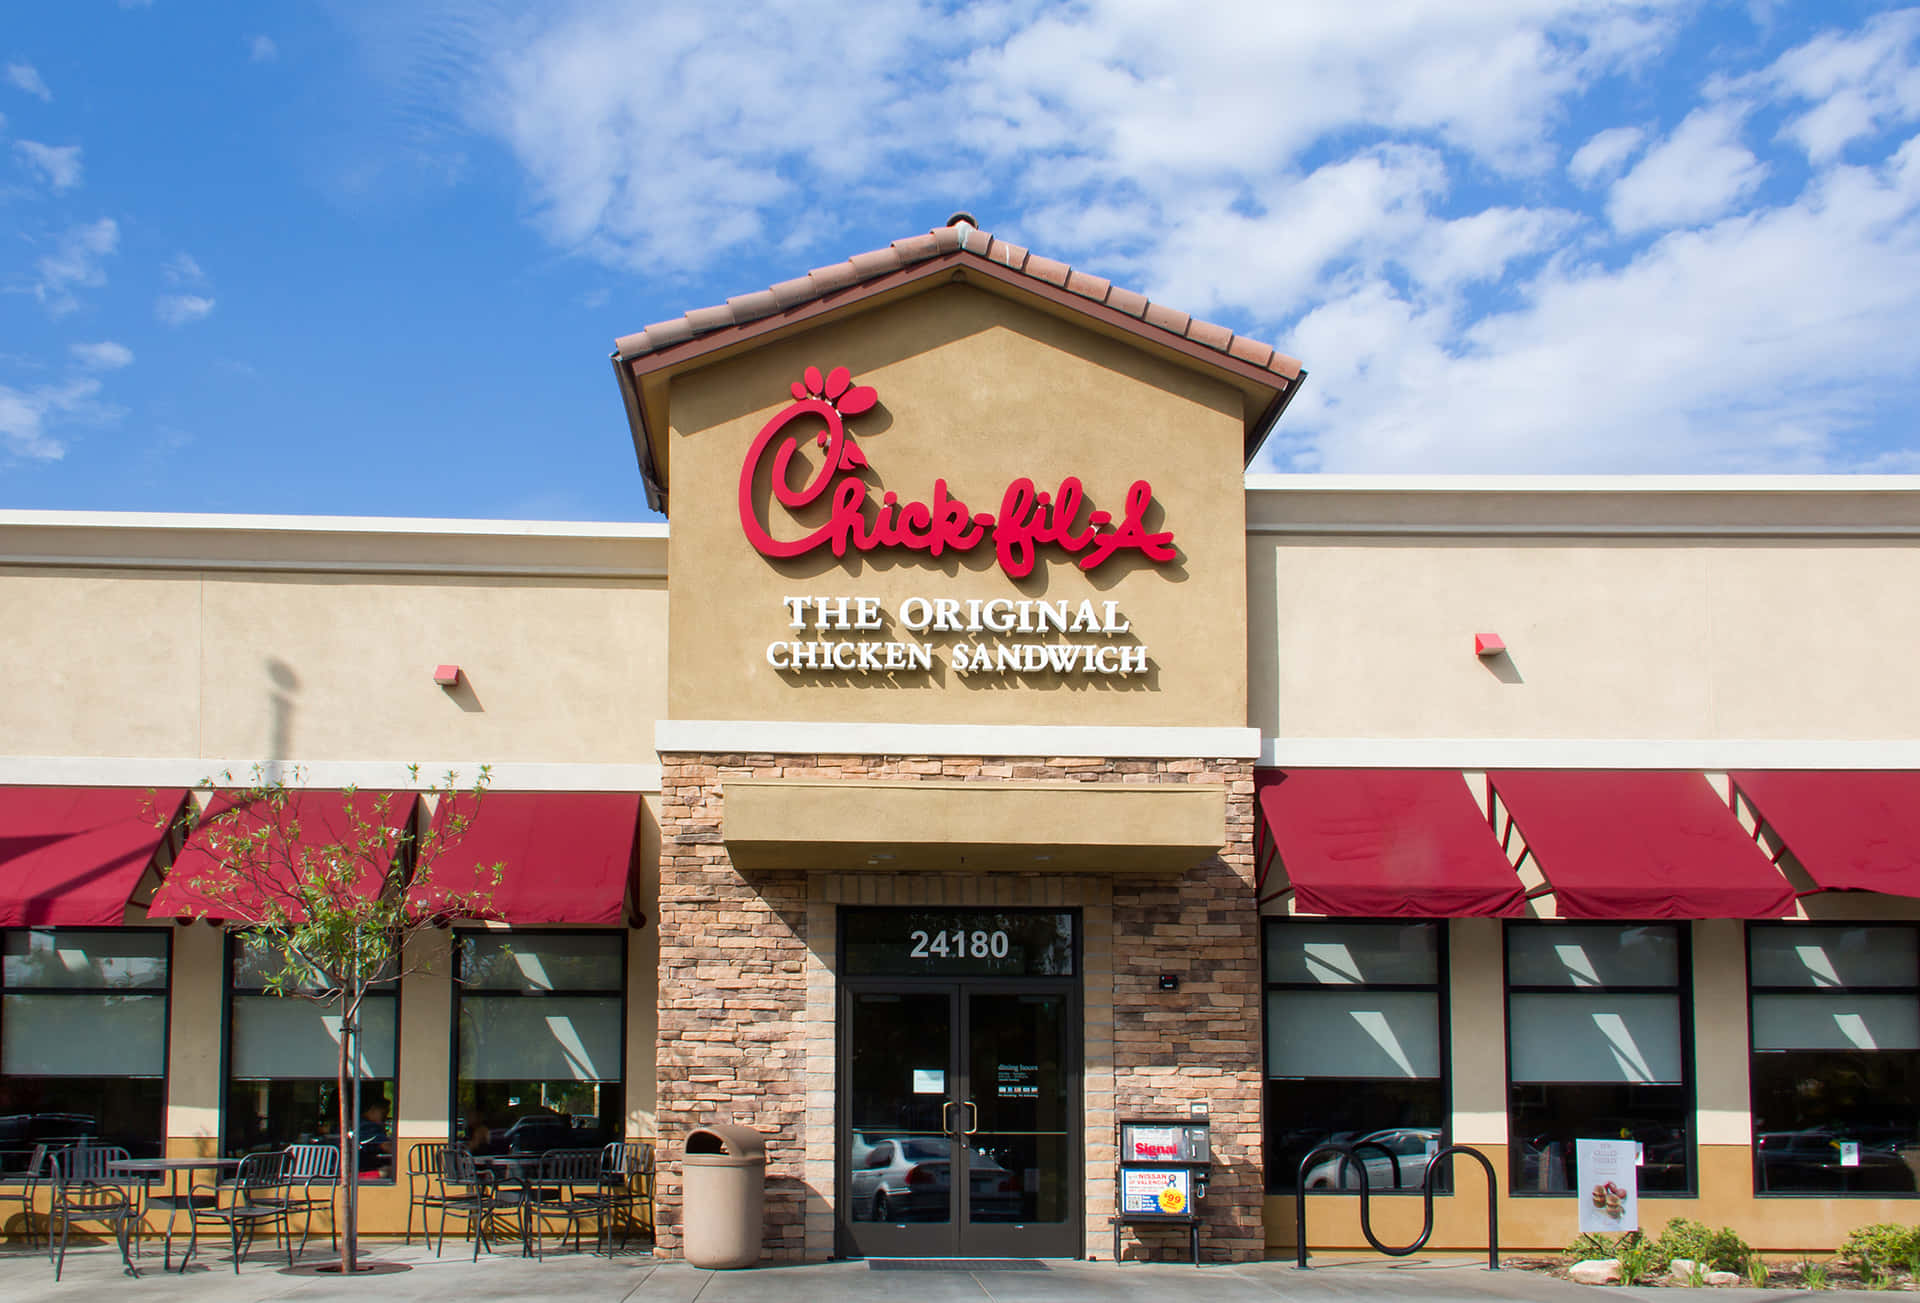 Enjoy Chick Fil A's delicious meals!